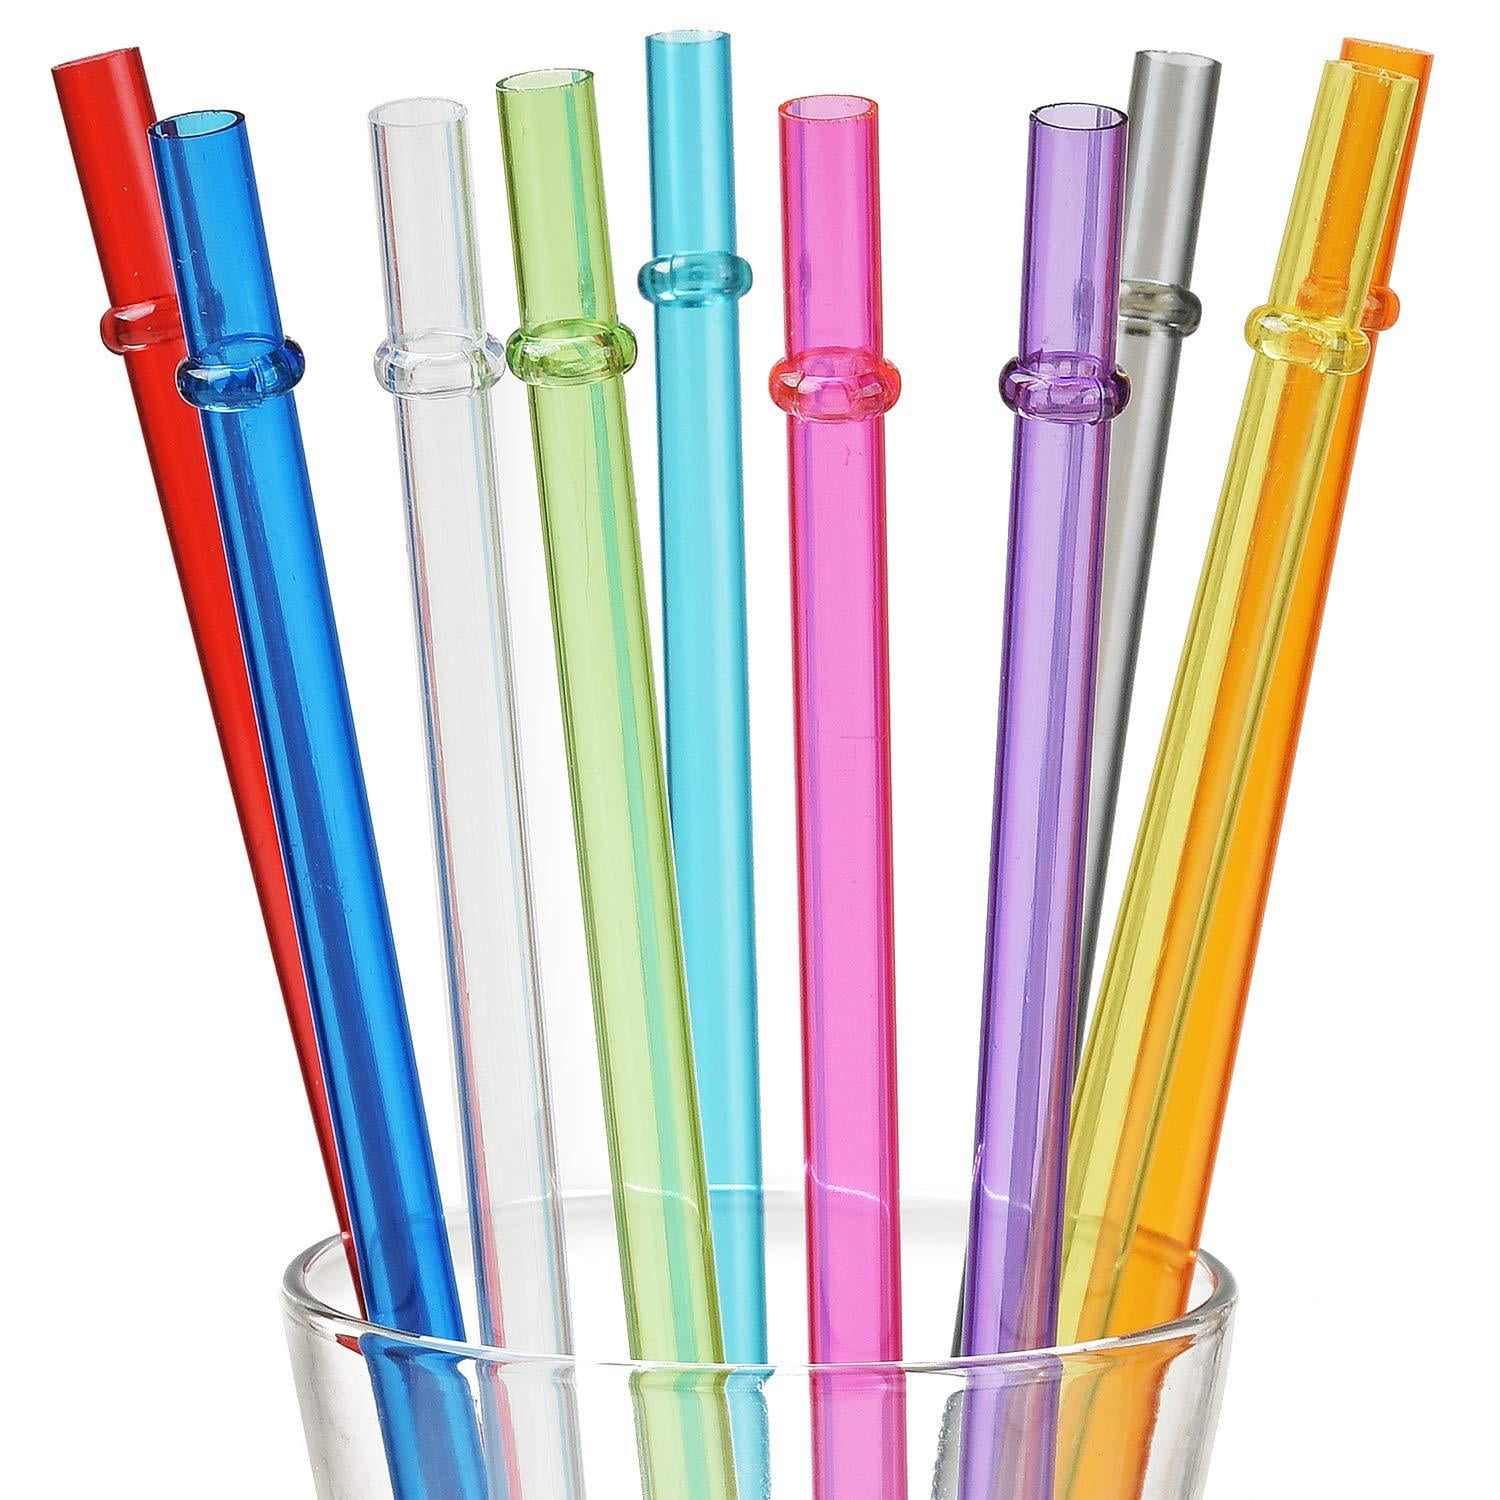 10.5” Reusable Silicone Straws + Cleaner - Long Length Replacement Straws  for Tumblers Acrylic,Yeti, rTic, Starbucks, Ozark - BPA Free Slim Drinking